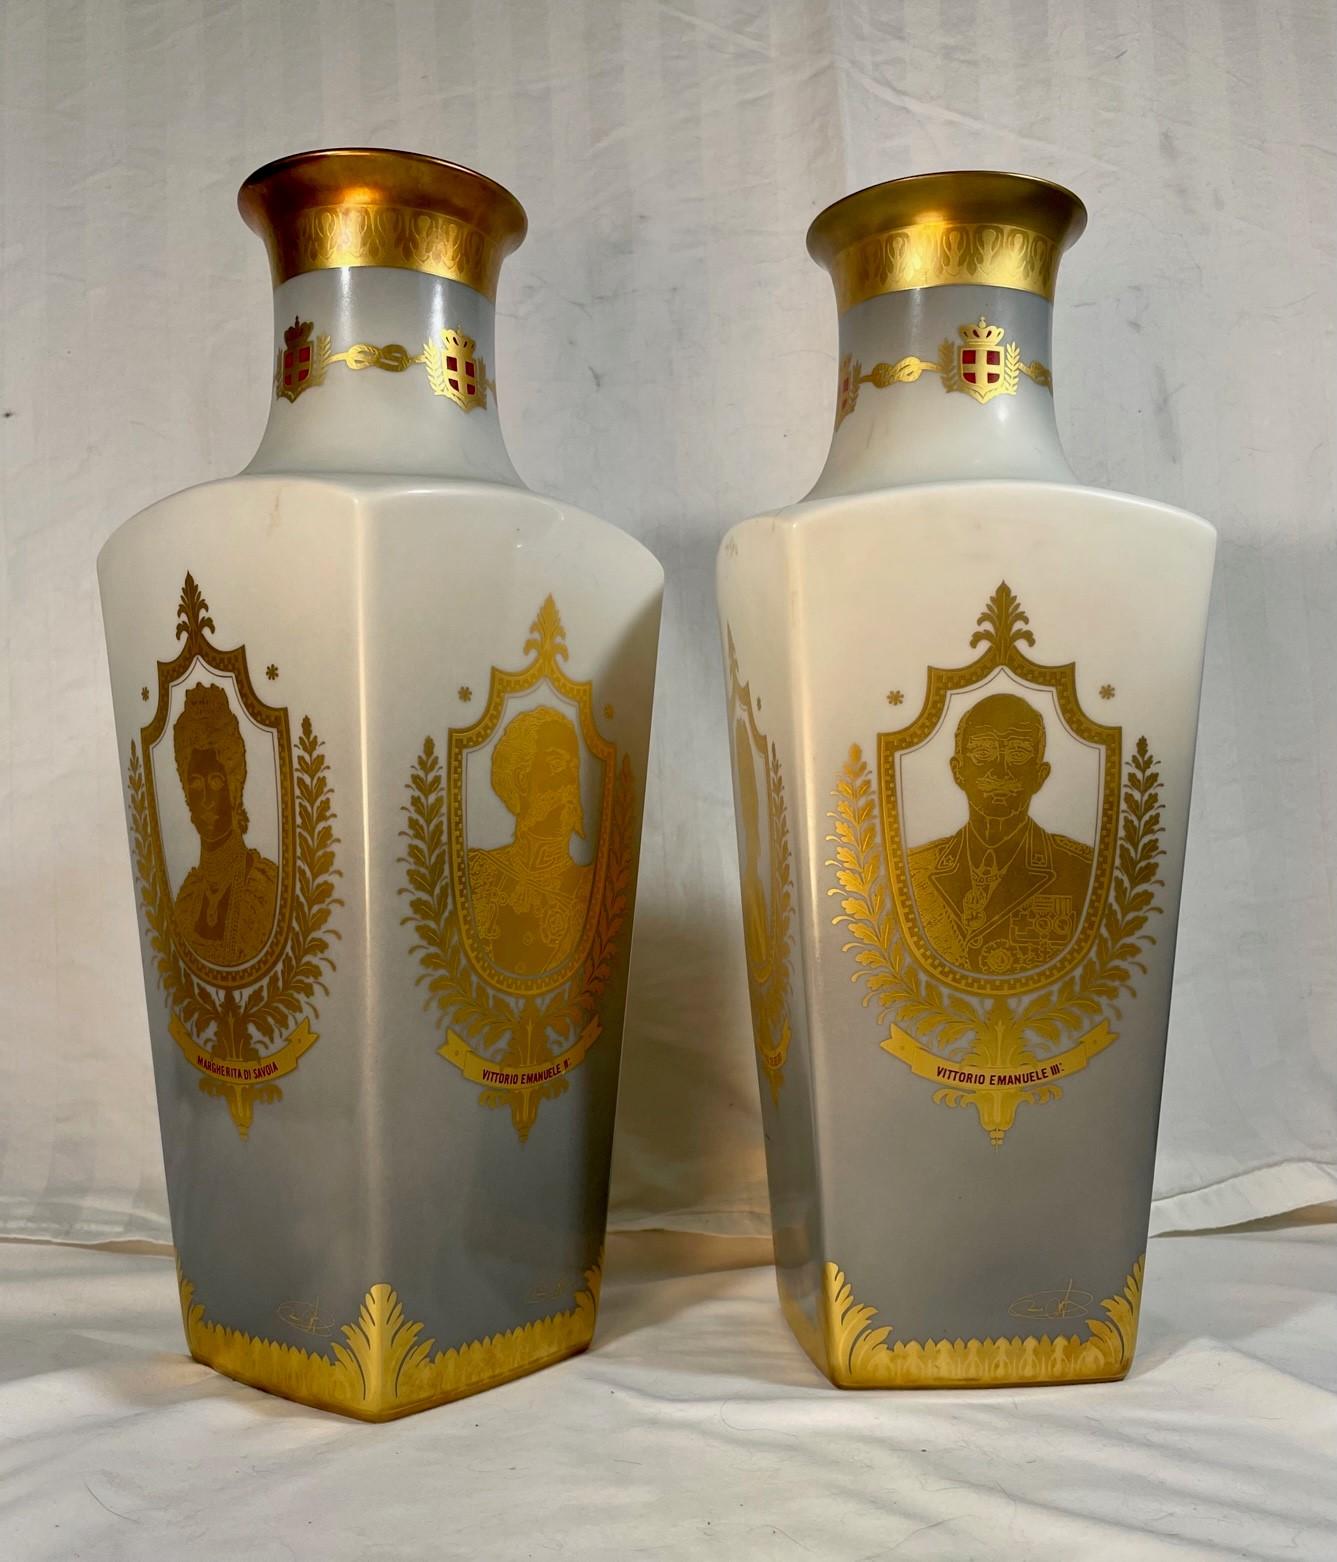 Pair of Historical Porcelain Vases from the Italian Nicasio Collection.

Pair of splendid porcelain vases from the limited edition of the 3000 from the well-known Nicasio Catanese Collection. The four-sided vases are, on each side, sublimely hand